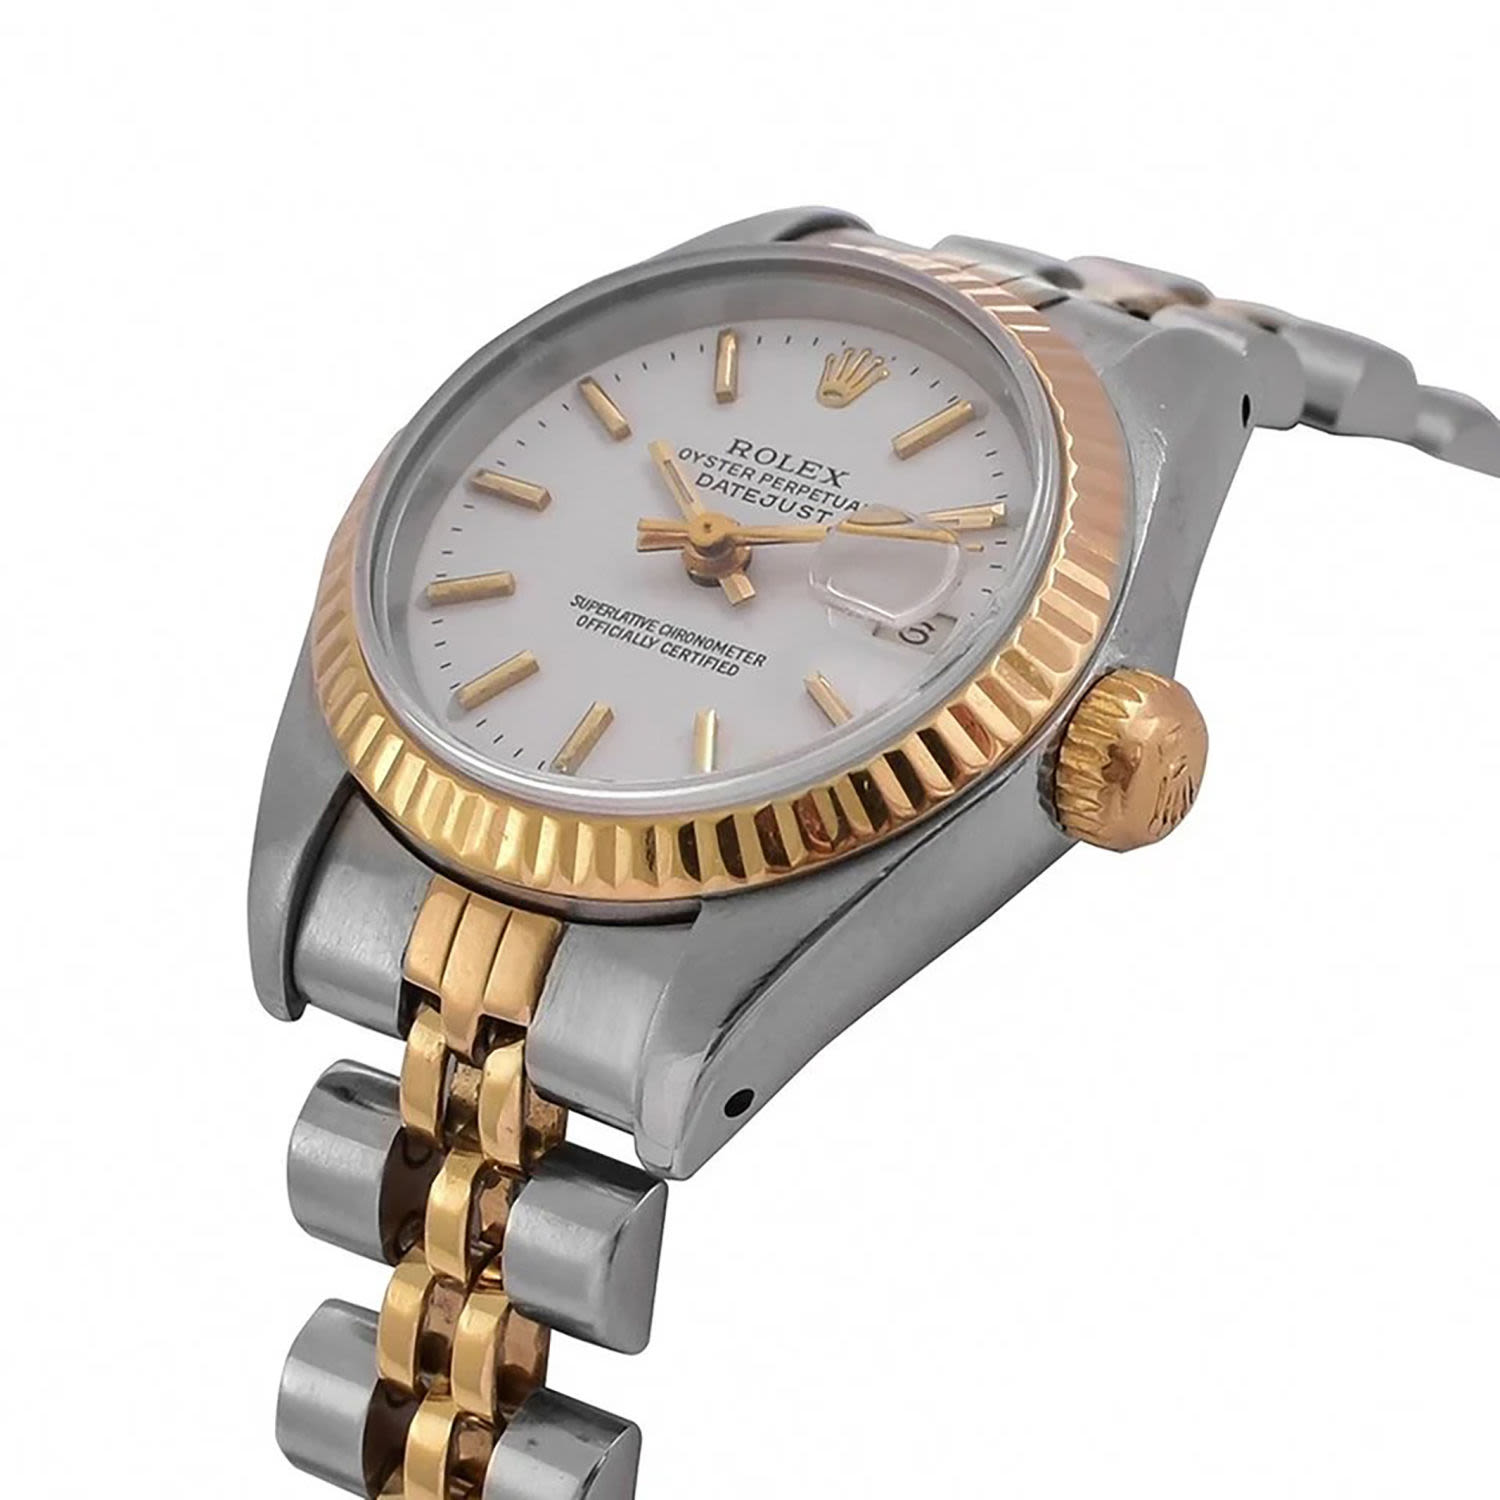 Rolex Lady Datejust wristwatch, in gold and steel, year 1986 - Image 3 of 4